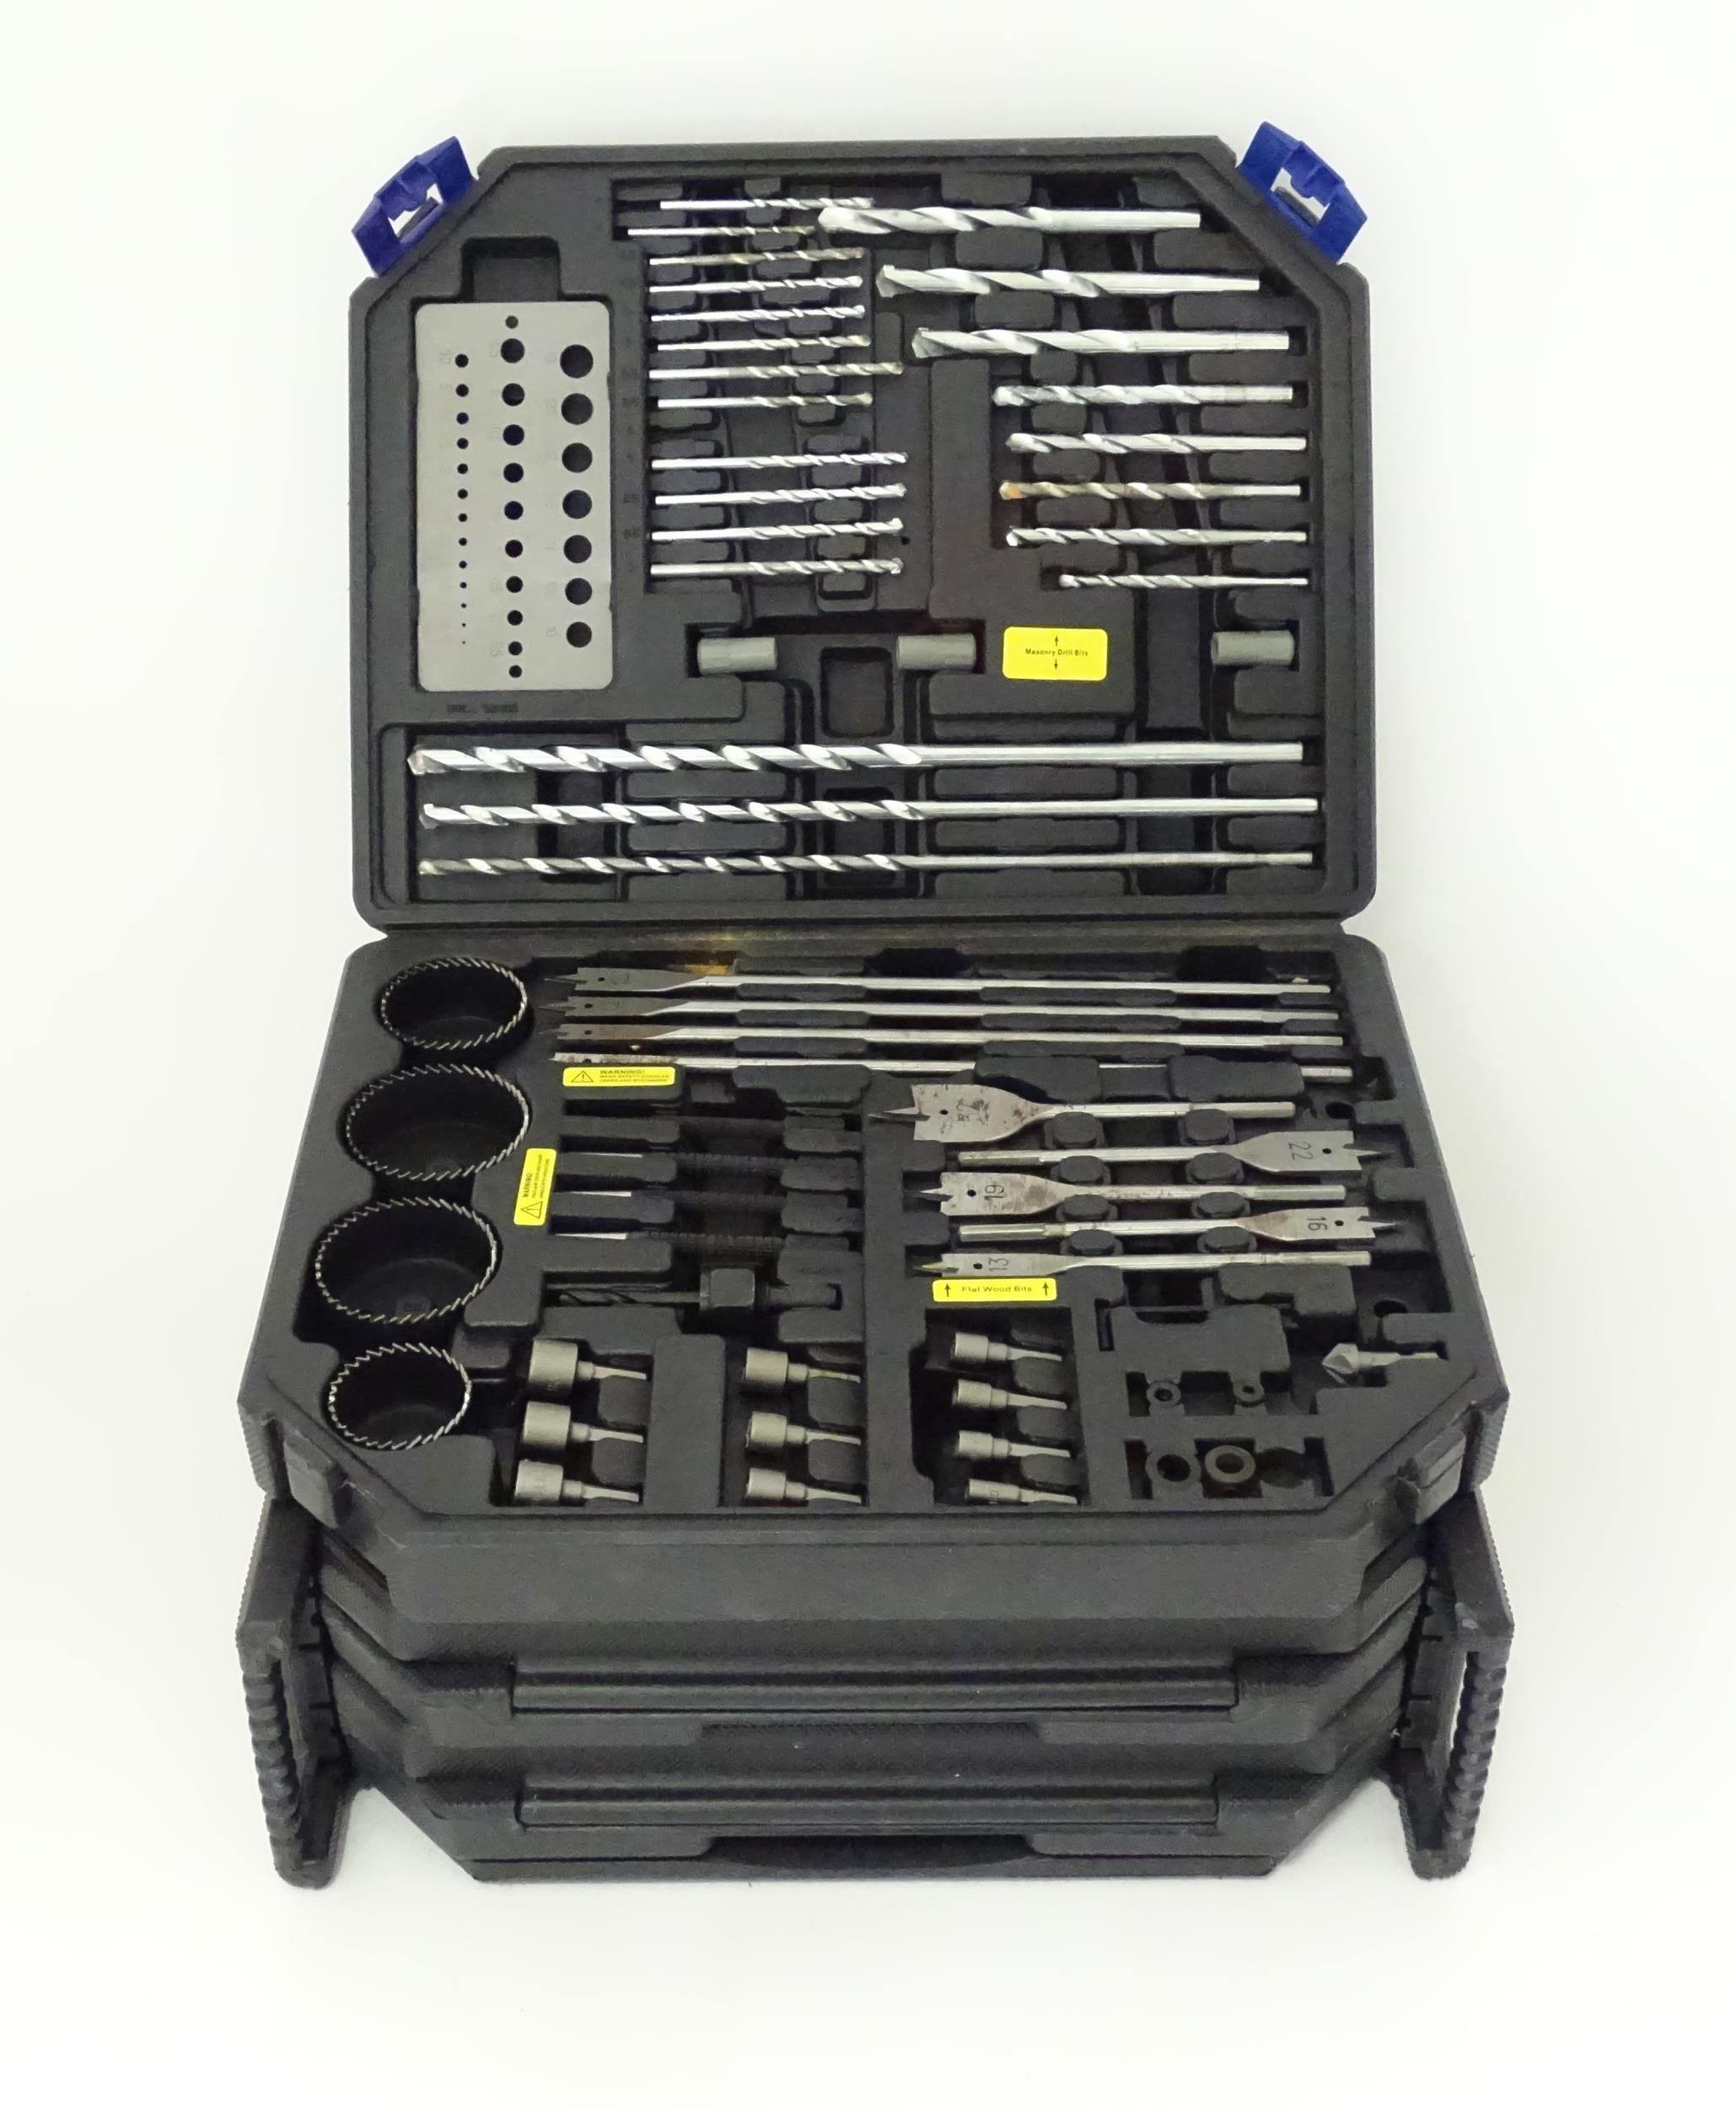 A Westfalia drill bit compendium, the fitted expanding case containing masonry and carpentry drill